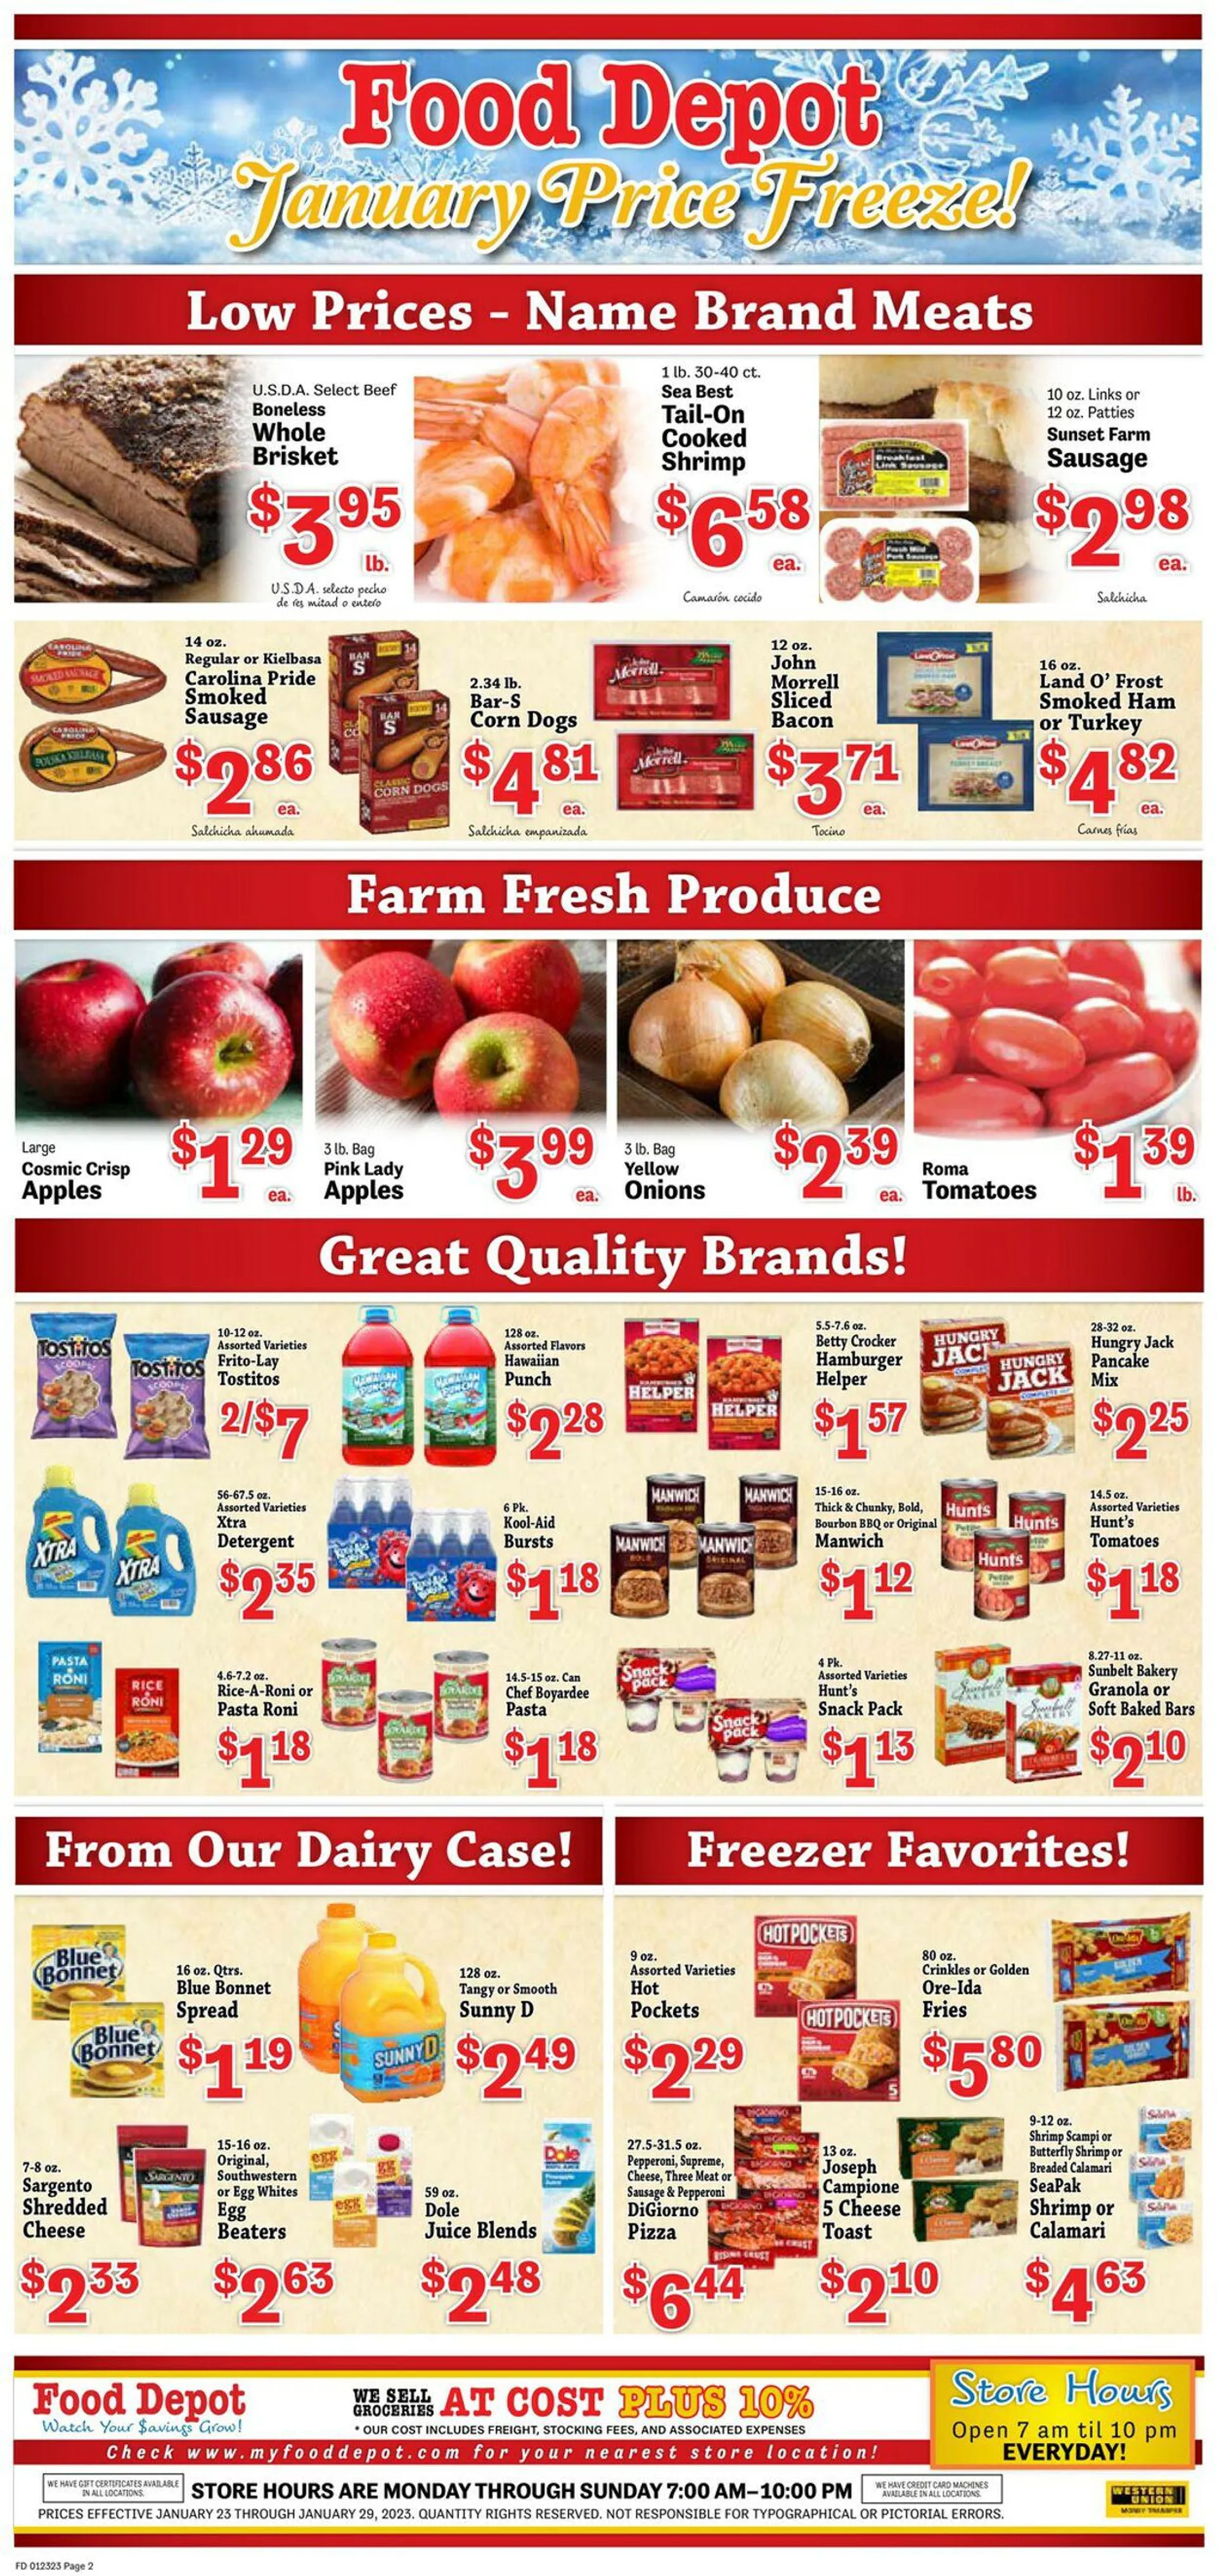 Food Depot Current weekly ad - 2